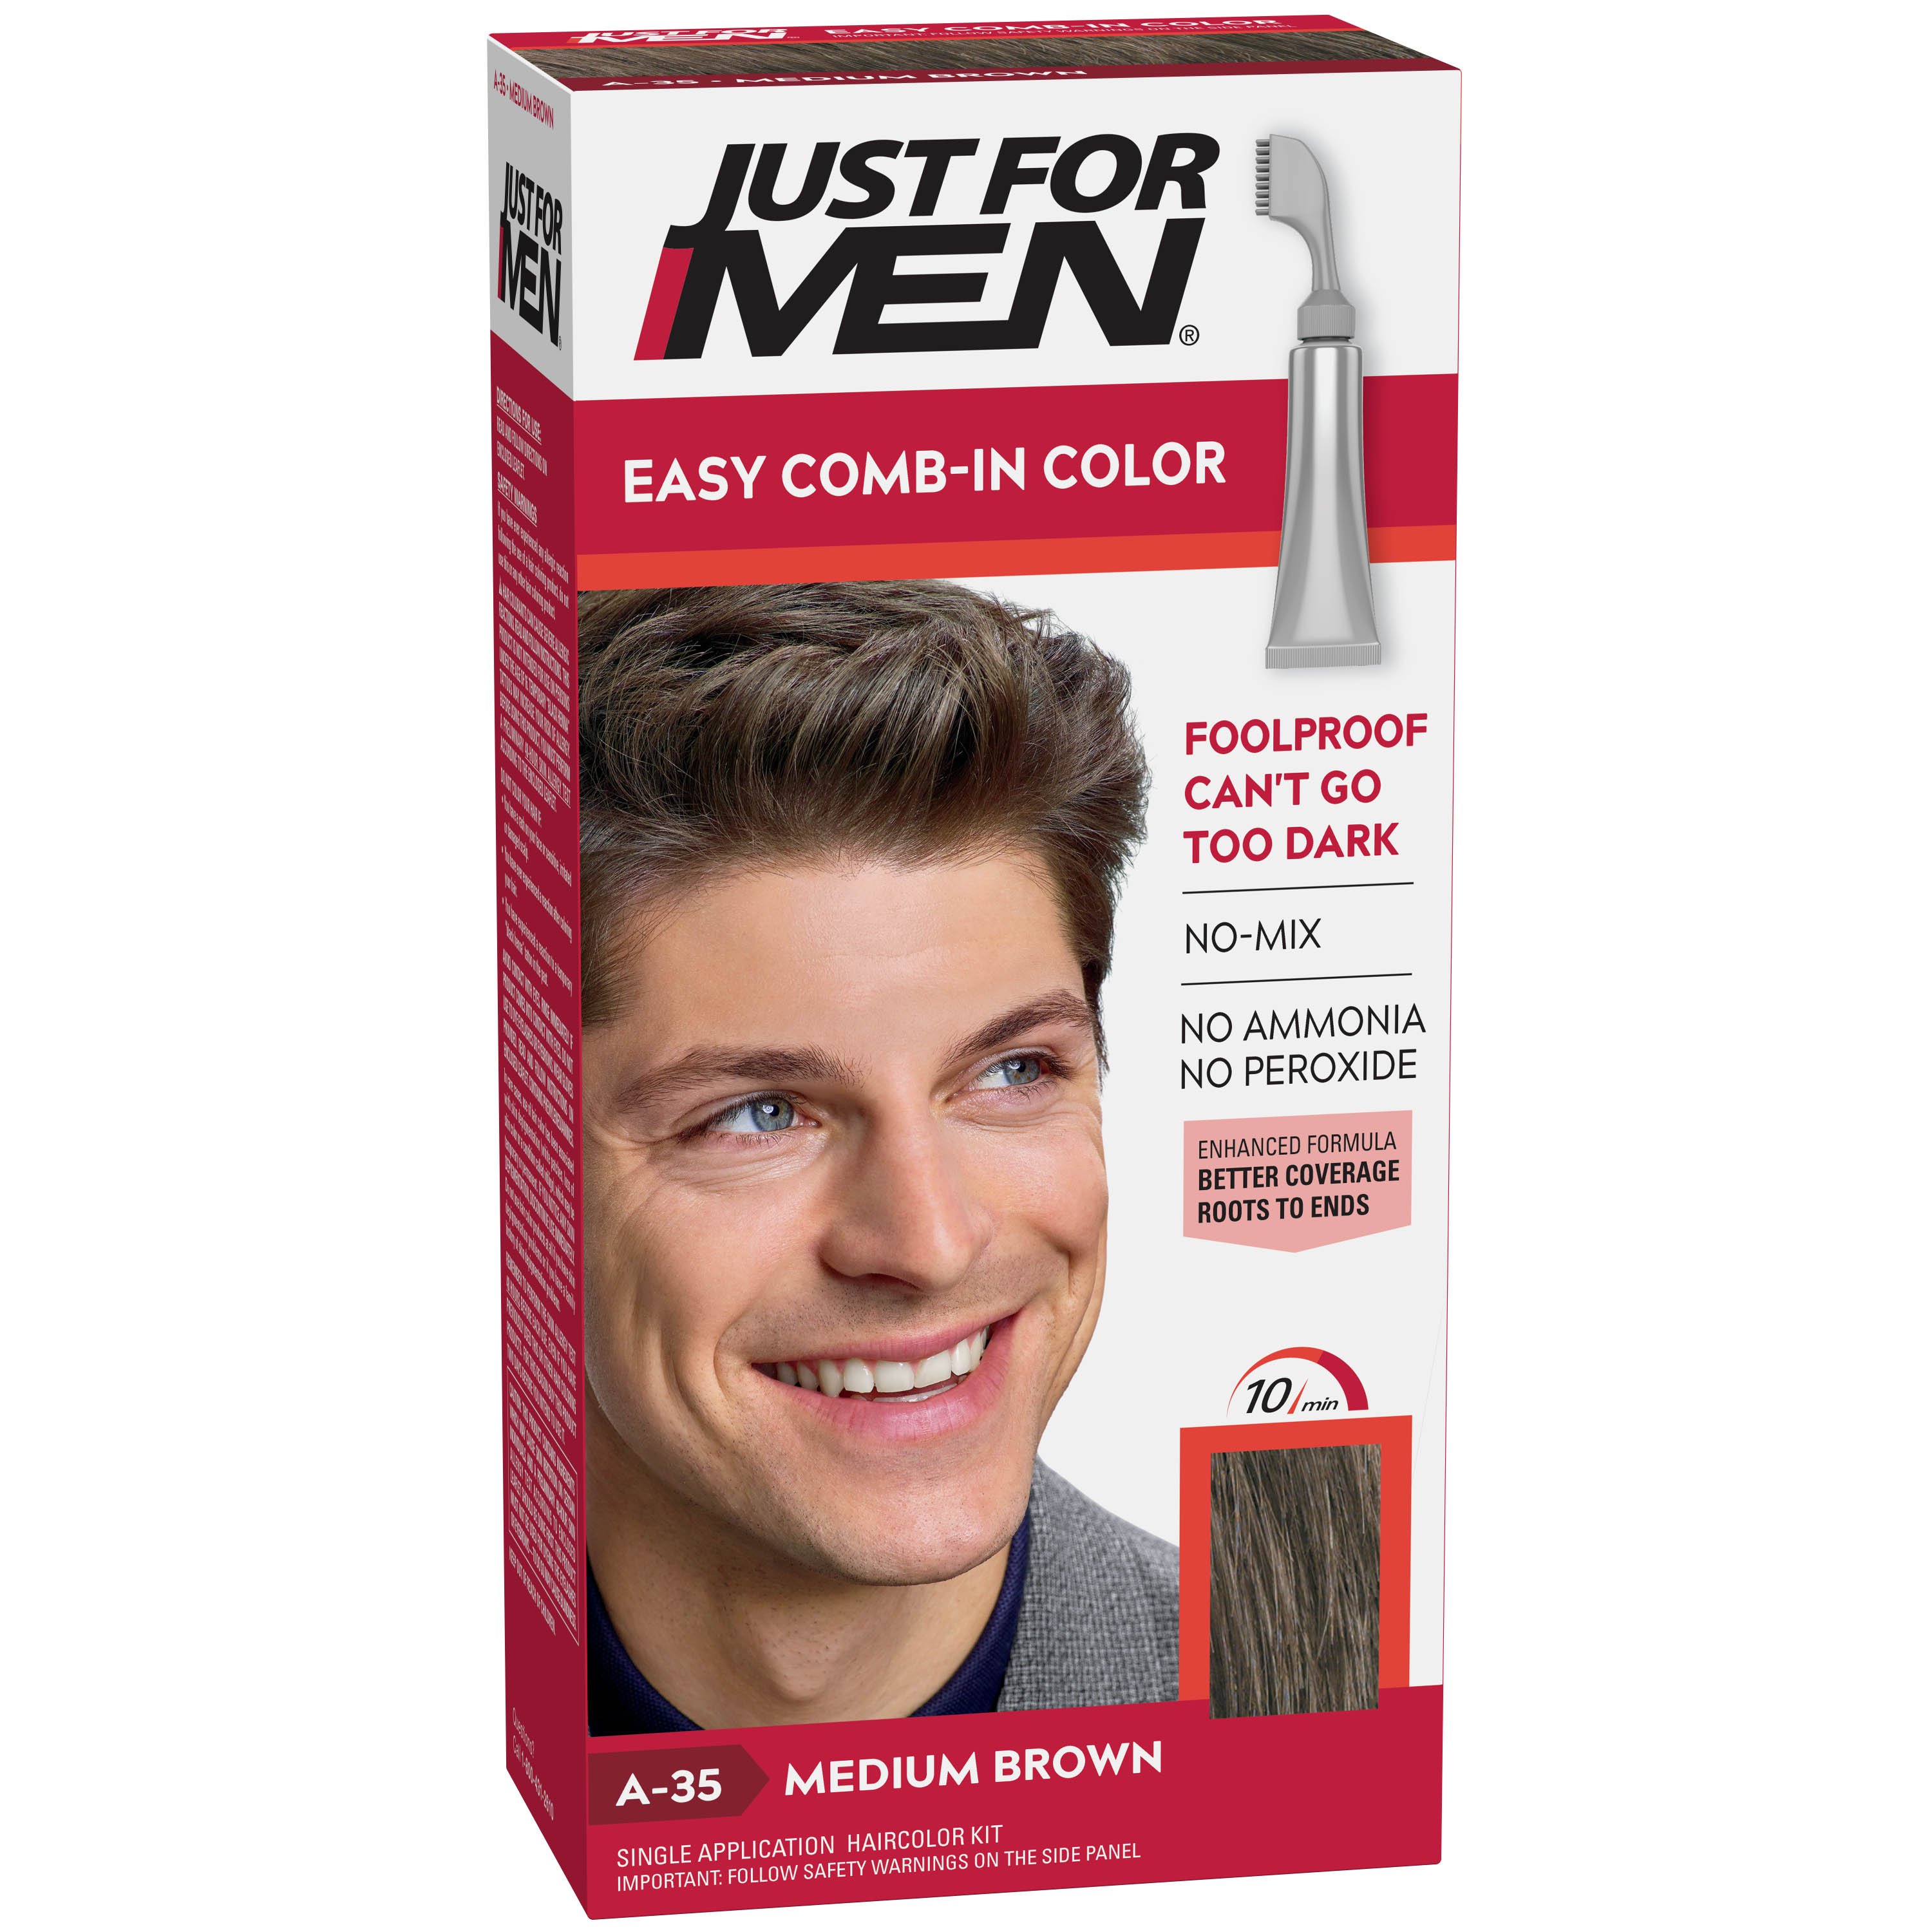 Just For Men Comb In Haircolor Medium Brown A-35 - Shop Hair Color At H-E-B